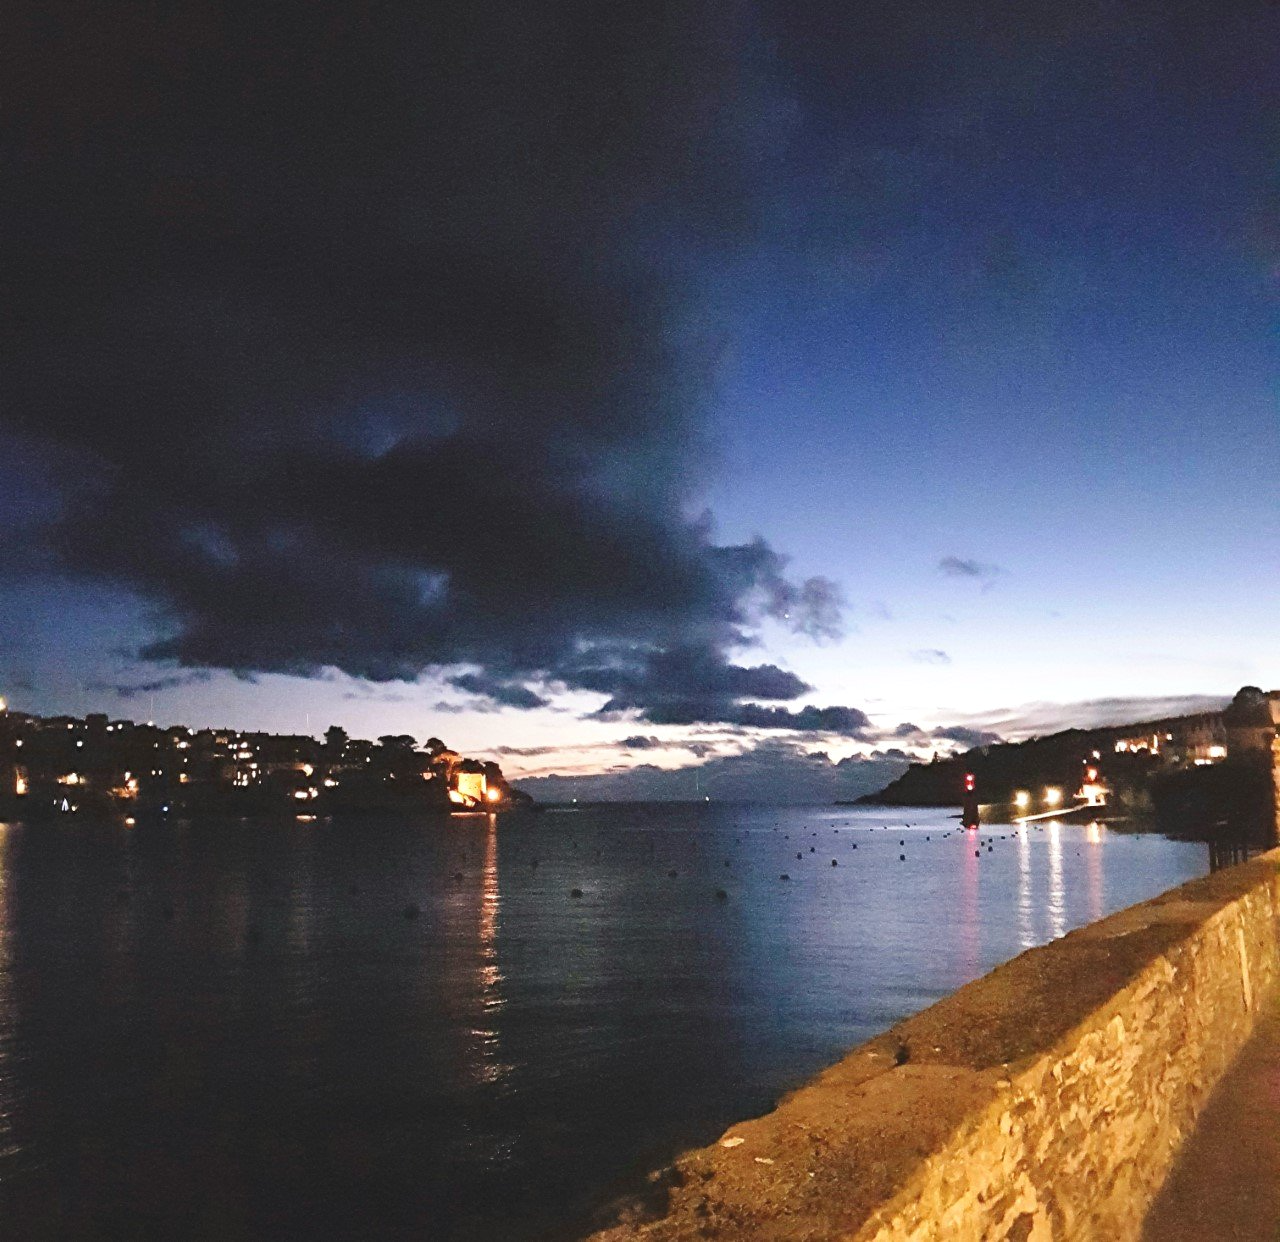 Fowey Harbour with reflected light on the water and an early night sky